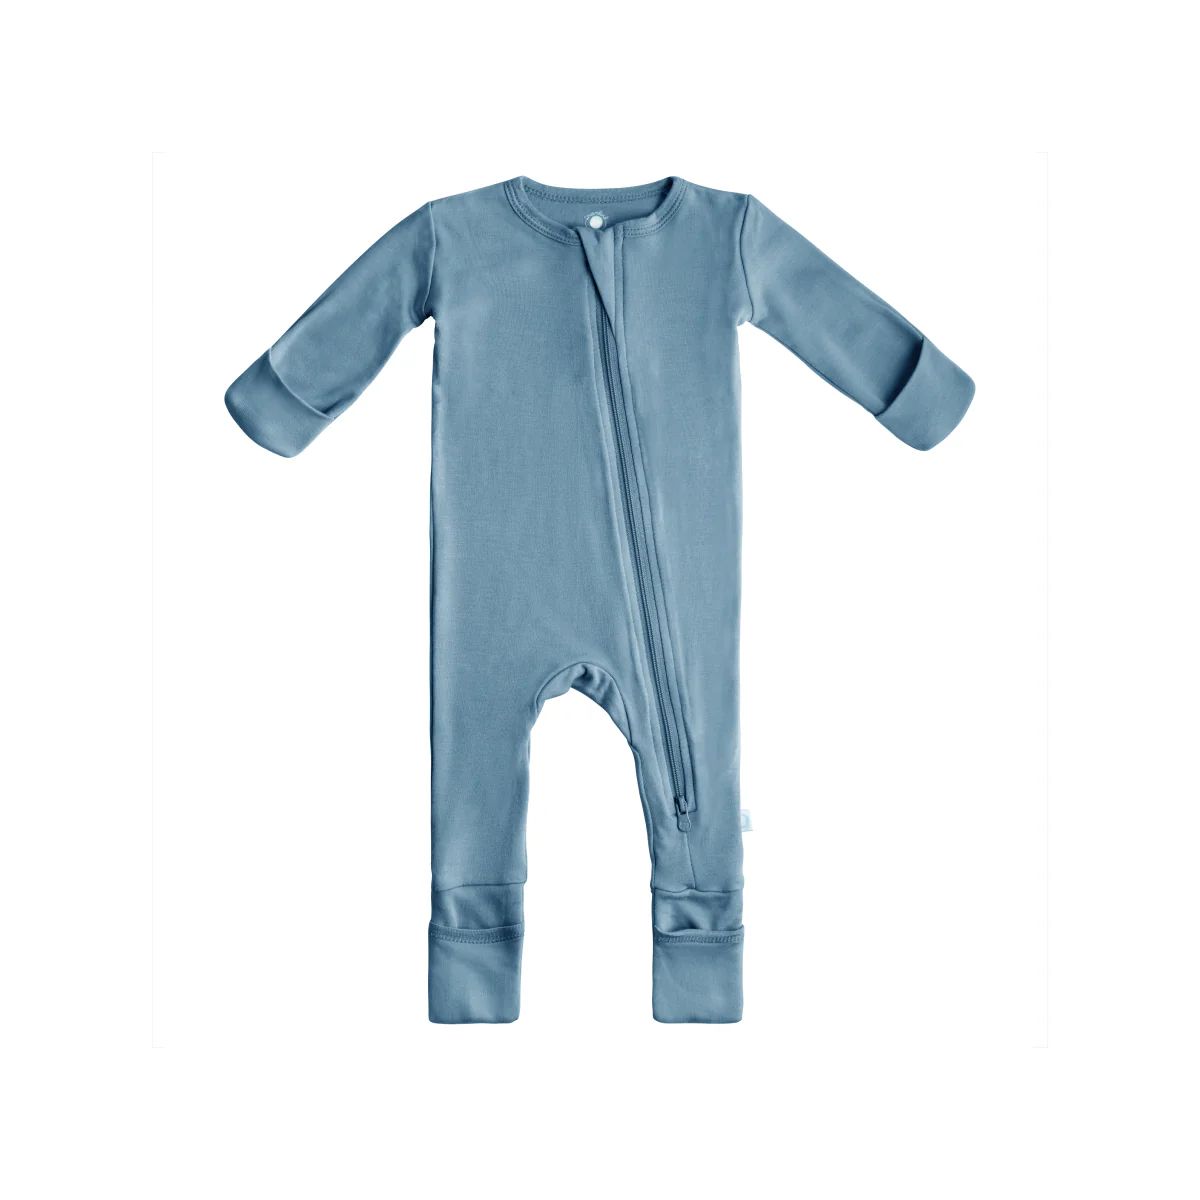 Baby Bamboo Pajamas w/ DreamCuffs - Solids | Dreamland Baby